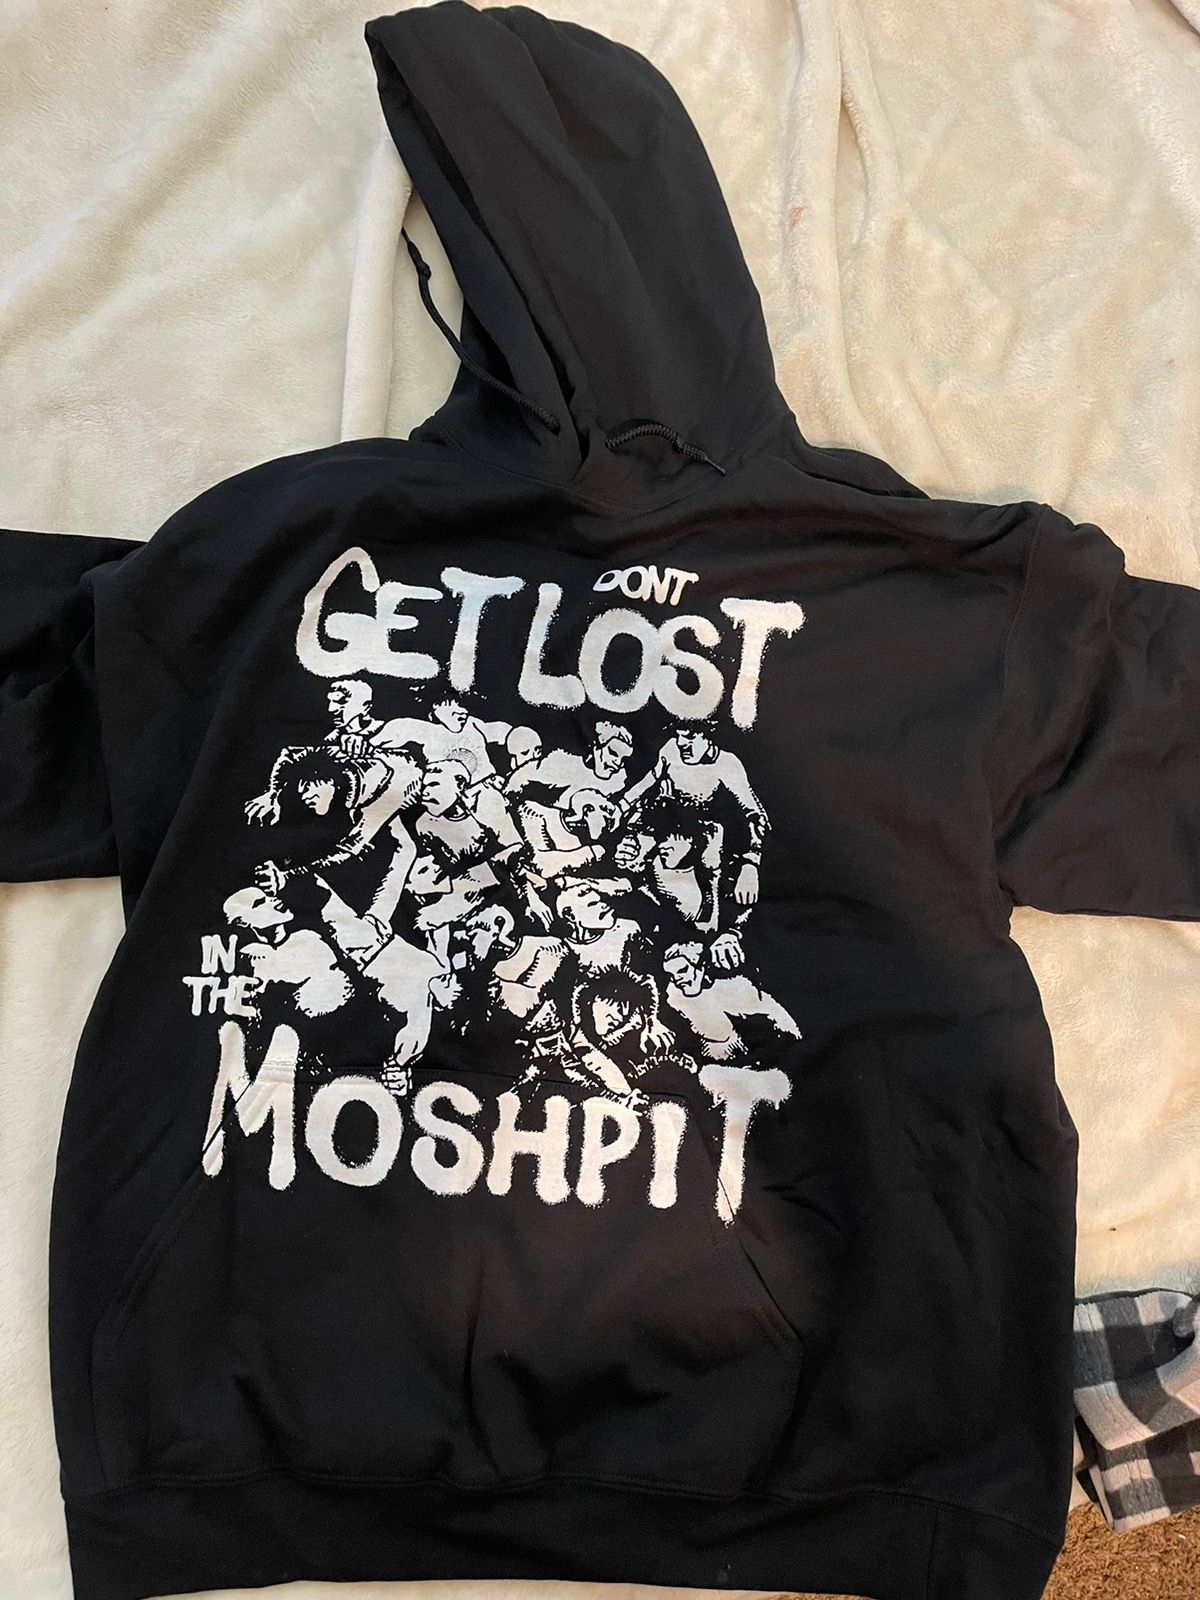 Destroy Lonely SNOT/$NOT GET BUSY OR DIE DONT GET LOST IN THE MOSHPIT HOODY Size US XL / EU 56 / 4 - 1 Preview